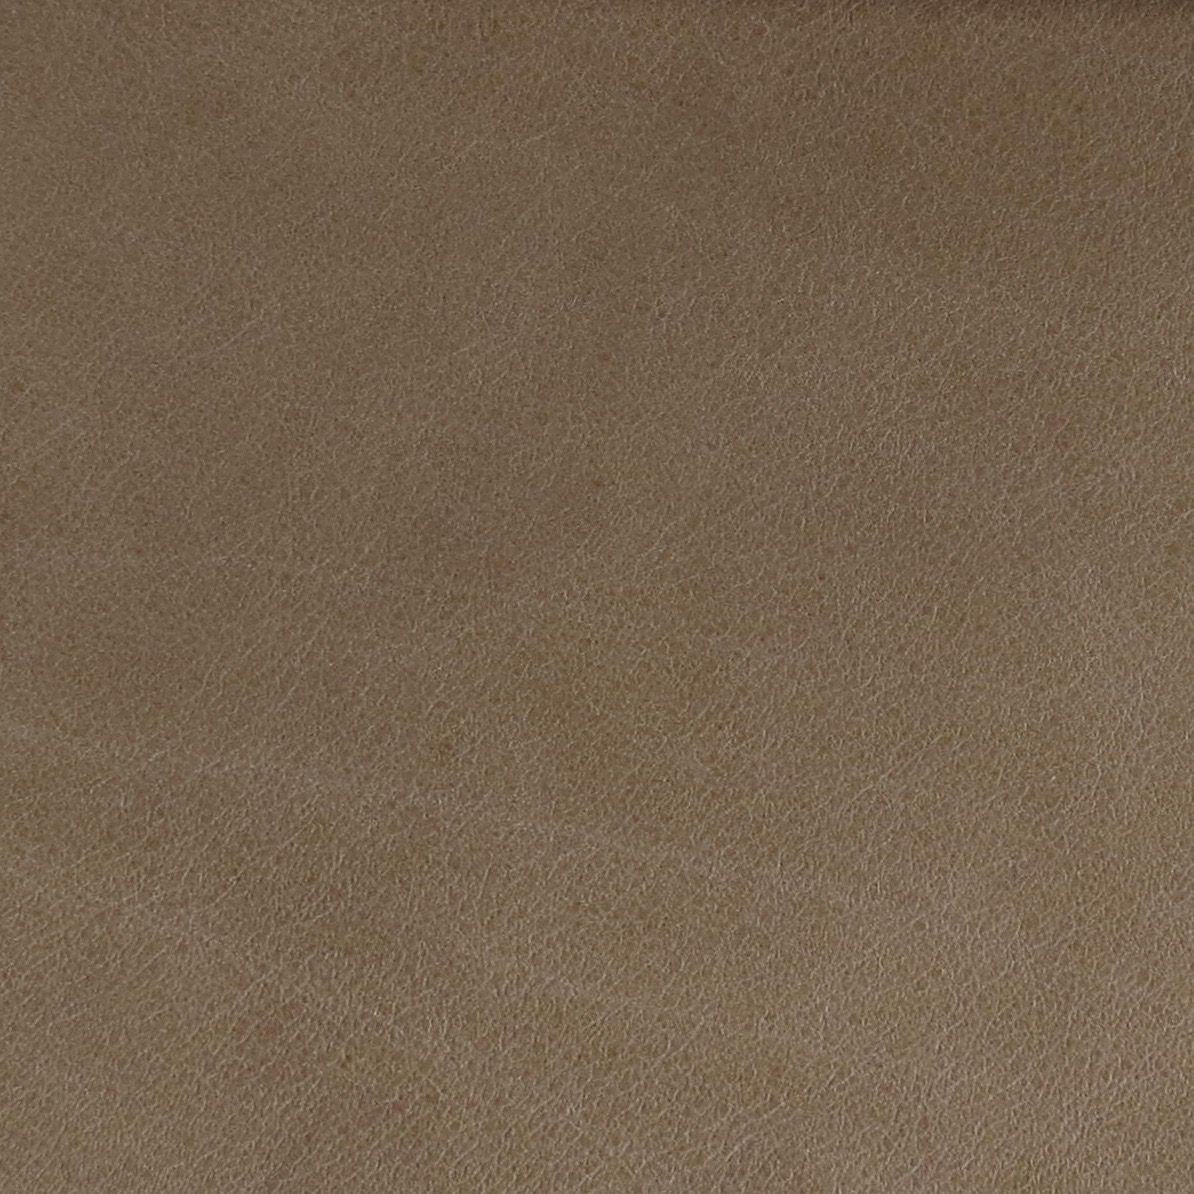 Leather - Cotswold Buff